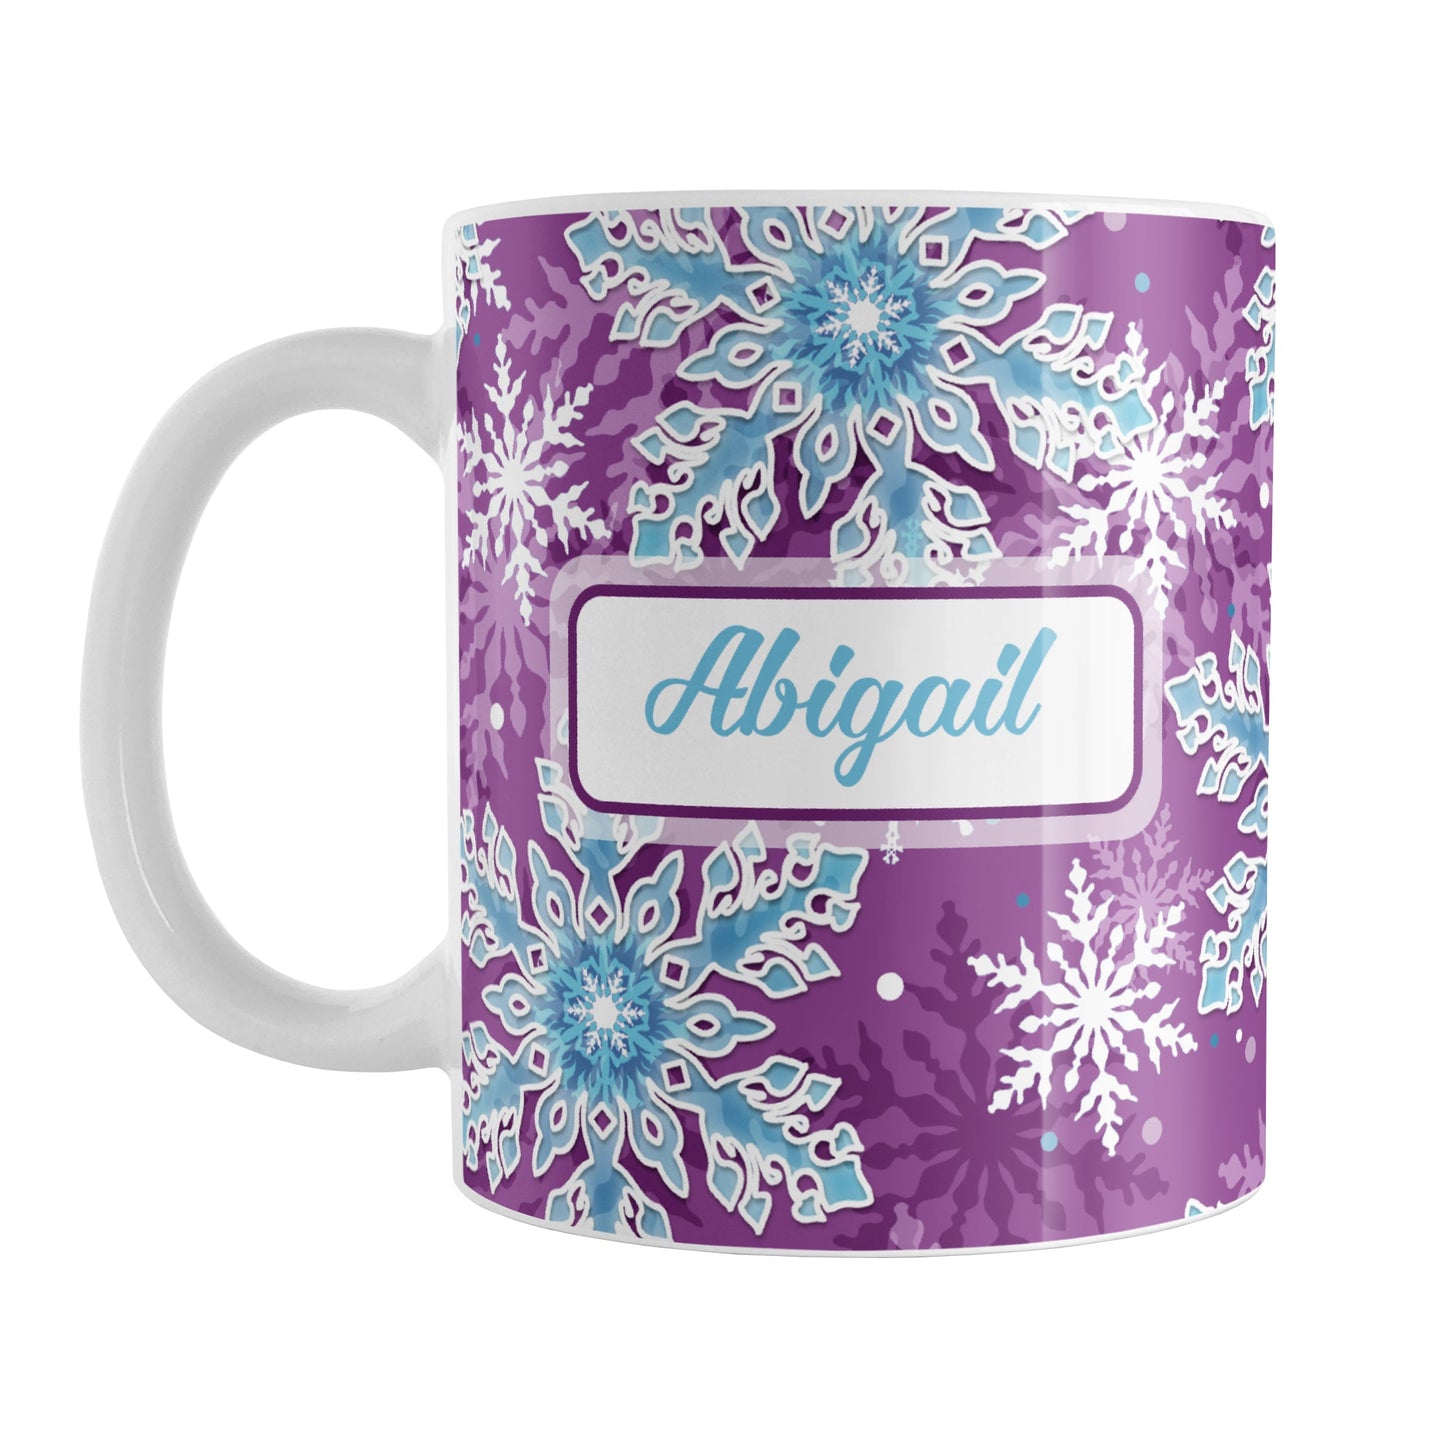 Personalized Purple Blue Snowflake Winter Mug (11oz) at Amy's Coffee Mugs. A ceramic coffee mug designed with a pattern of aqua blue and white snowflakes over a purple background color that wraps around the mug to the handle. Your name is custom printed in an aqua blue script font on both sides of this winter themed mug.